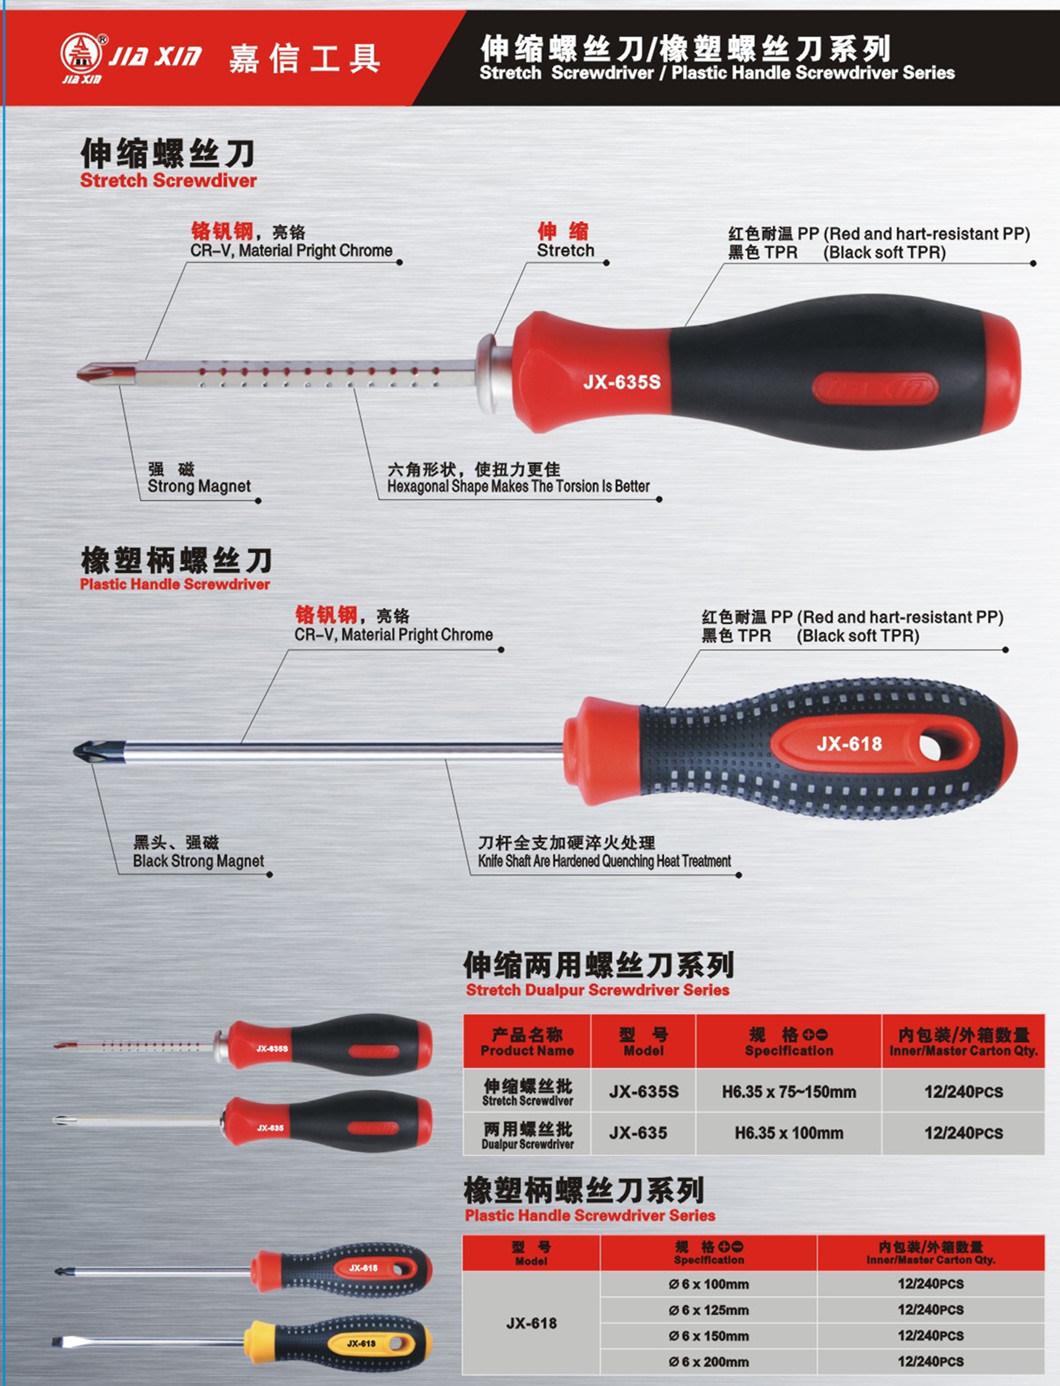 High Quality Retractable Hexagonal High Intensity Magnetic Screwdriver